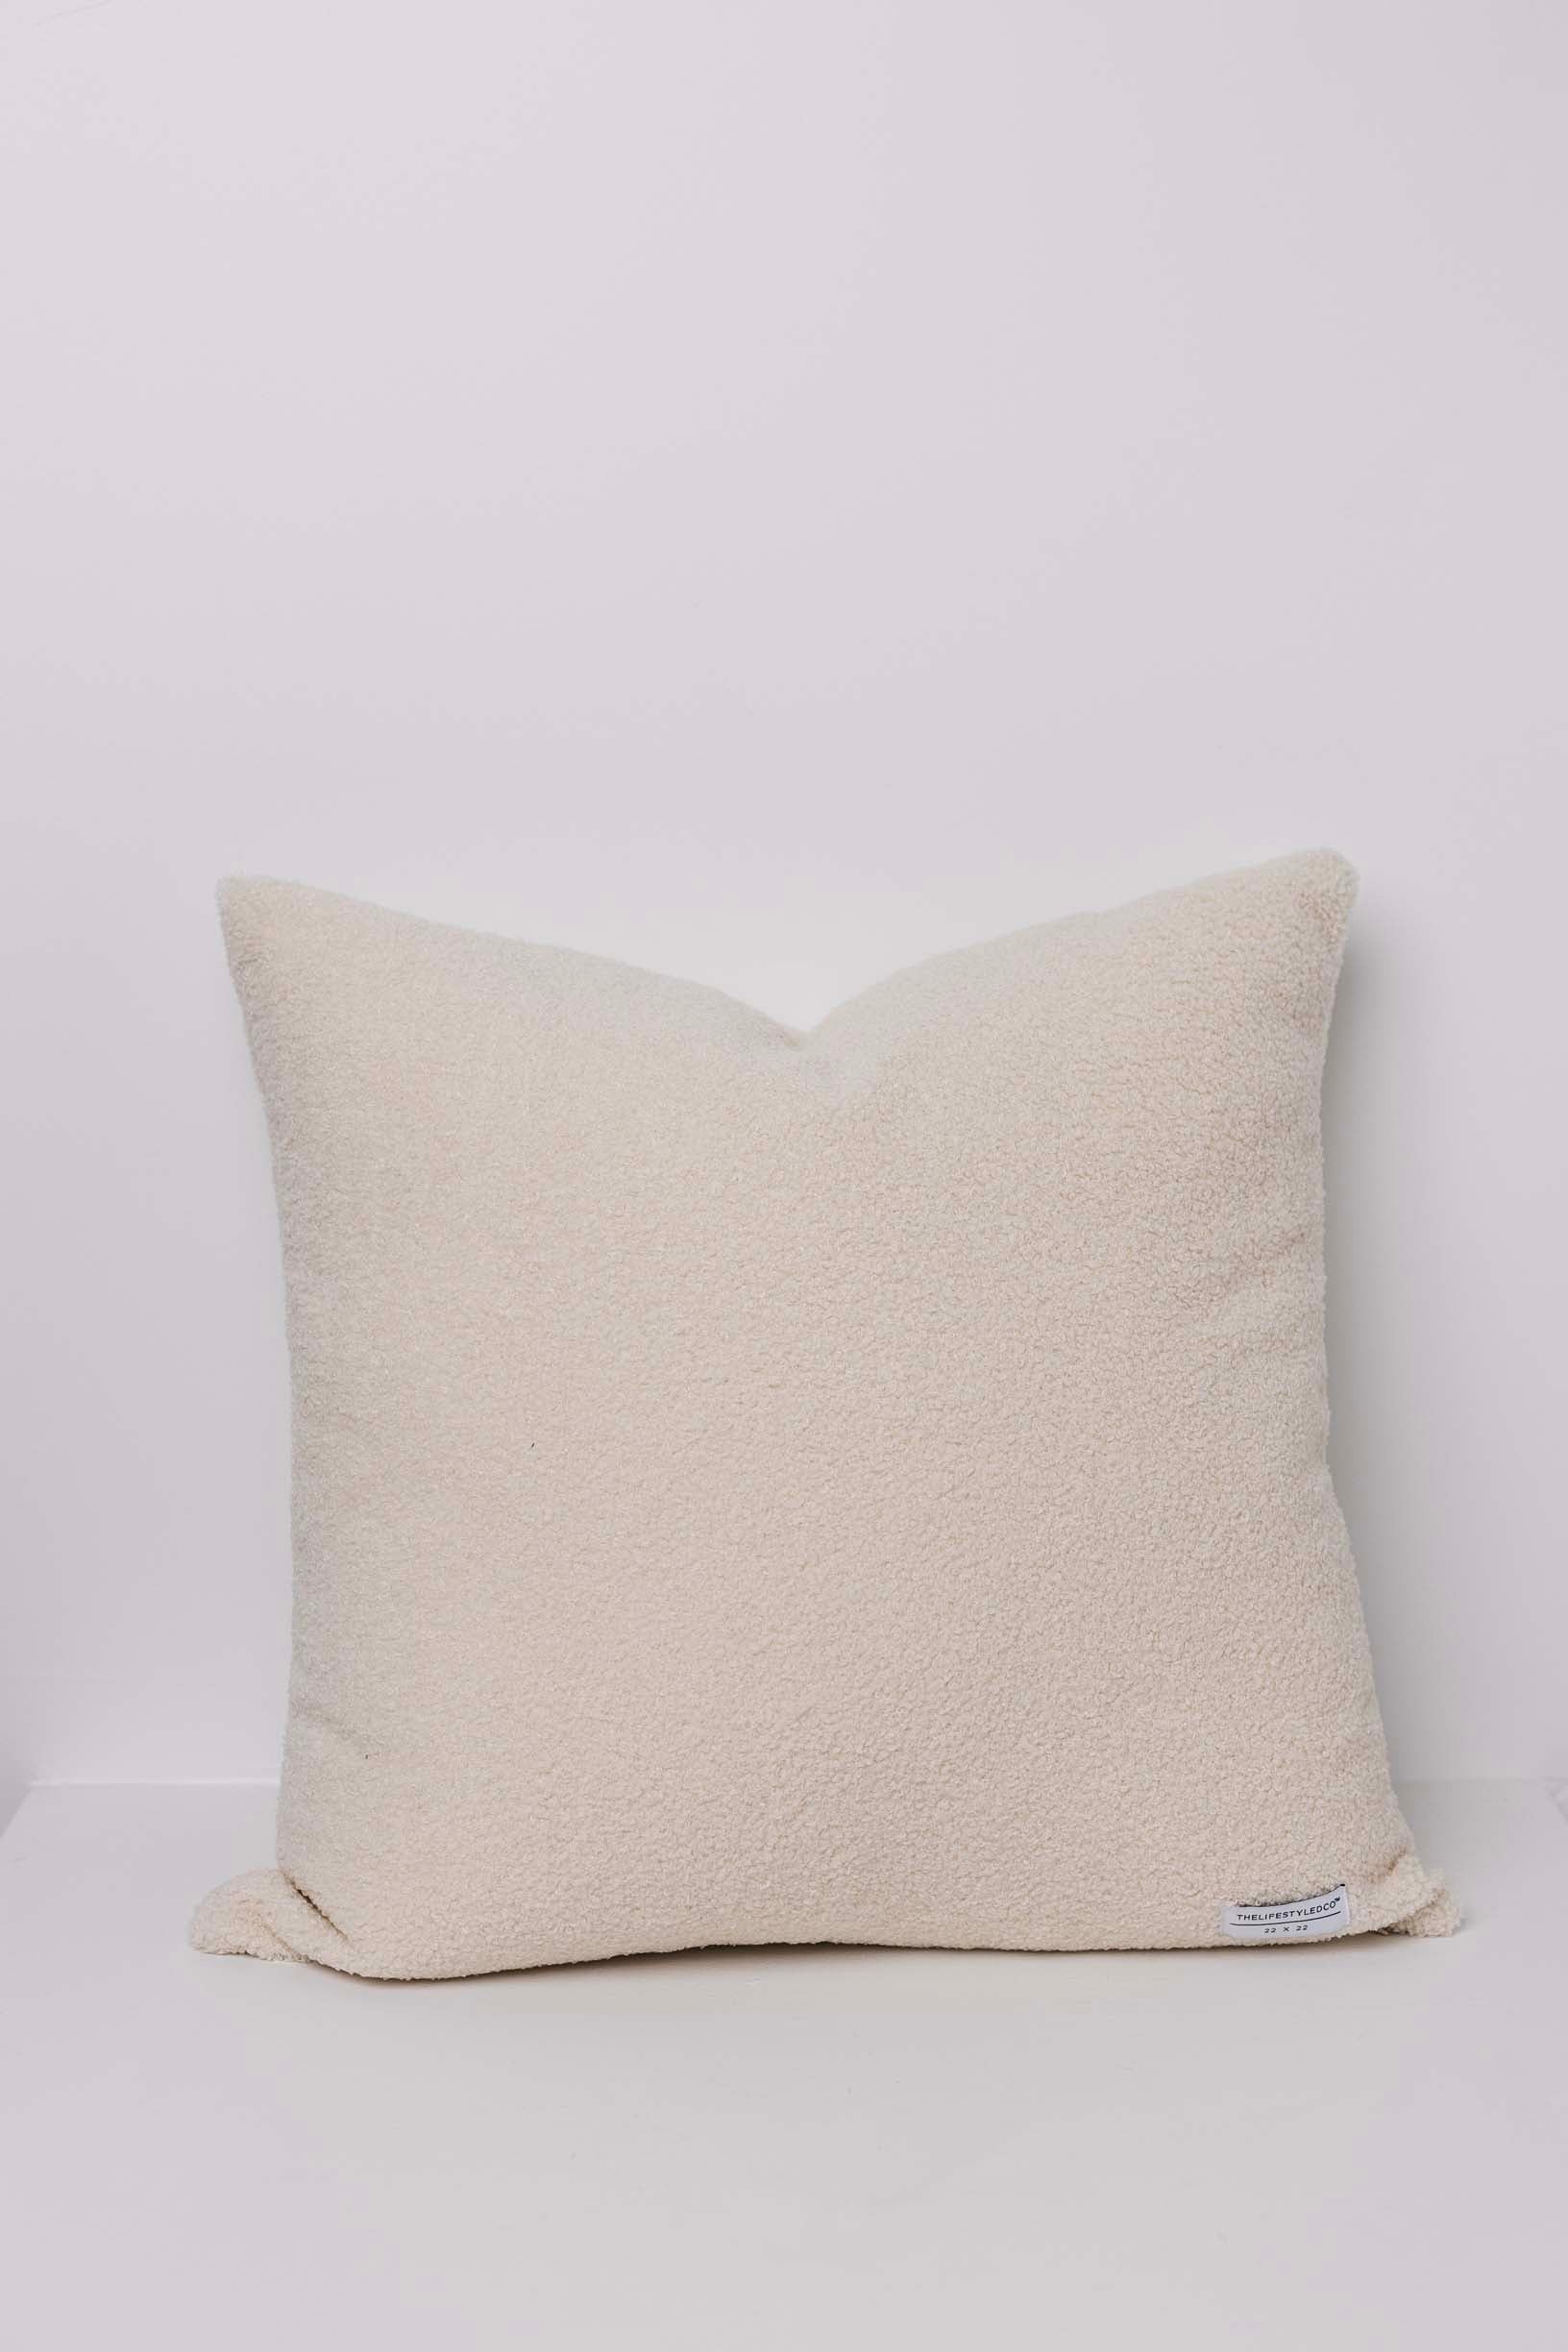 Whitten Wooly Boucle Pillow - 3 Sizes